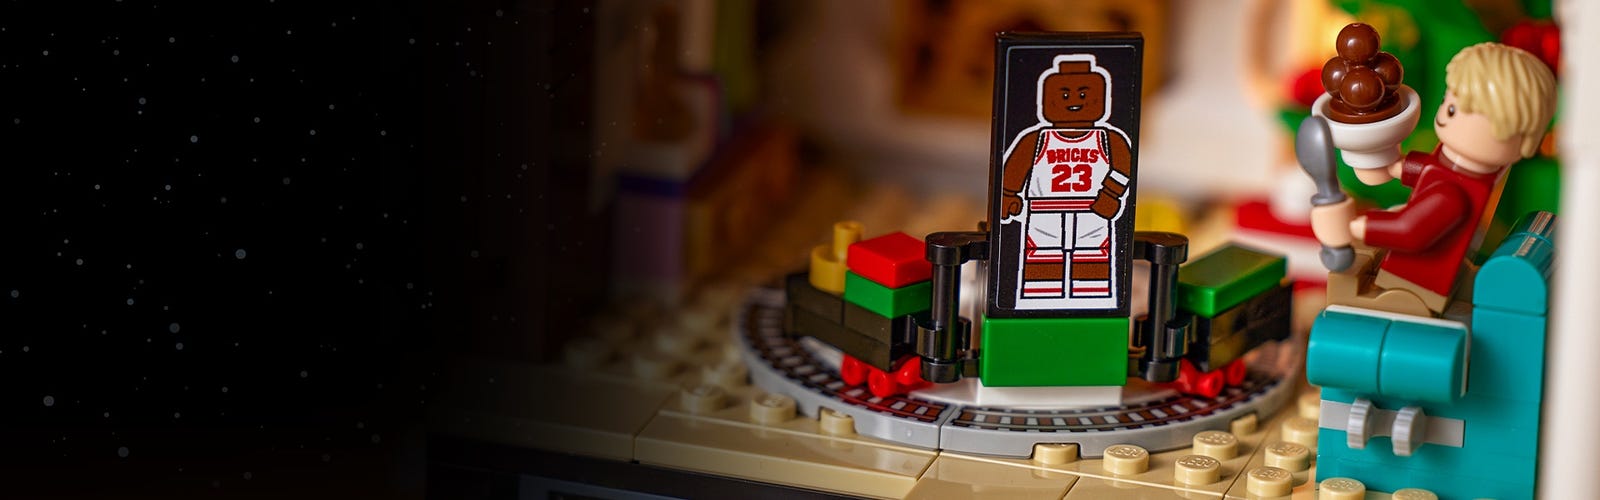 Lego Ideas Home Alone 21330 • See best prices today »